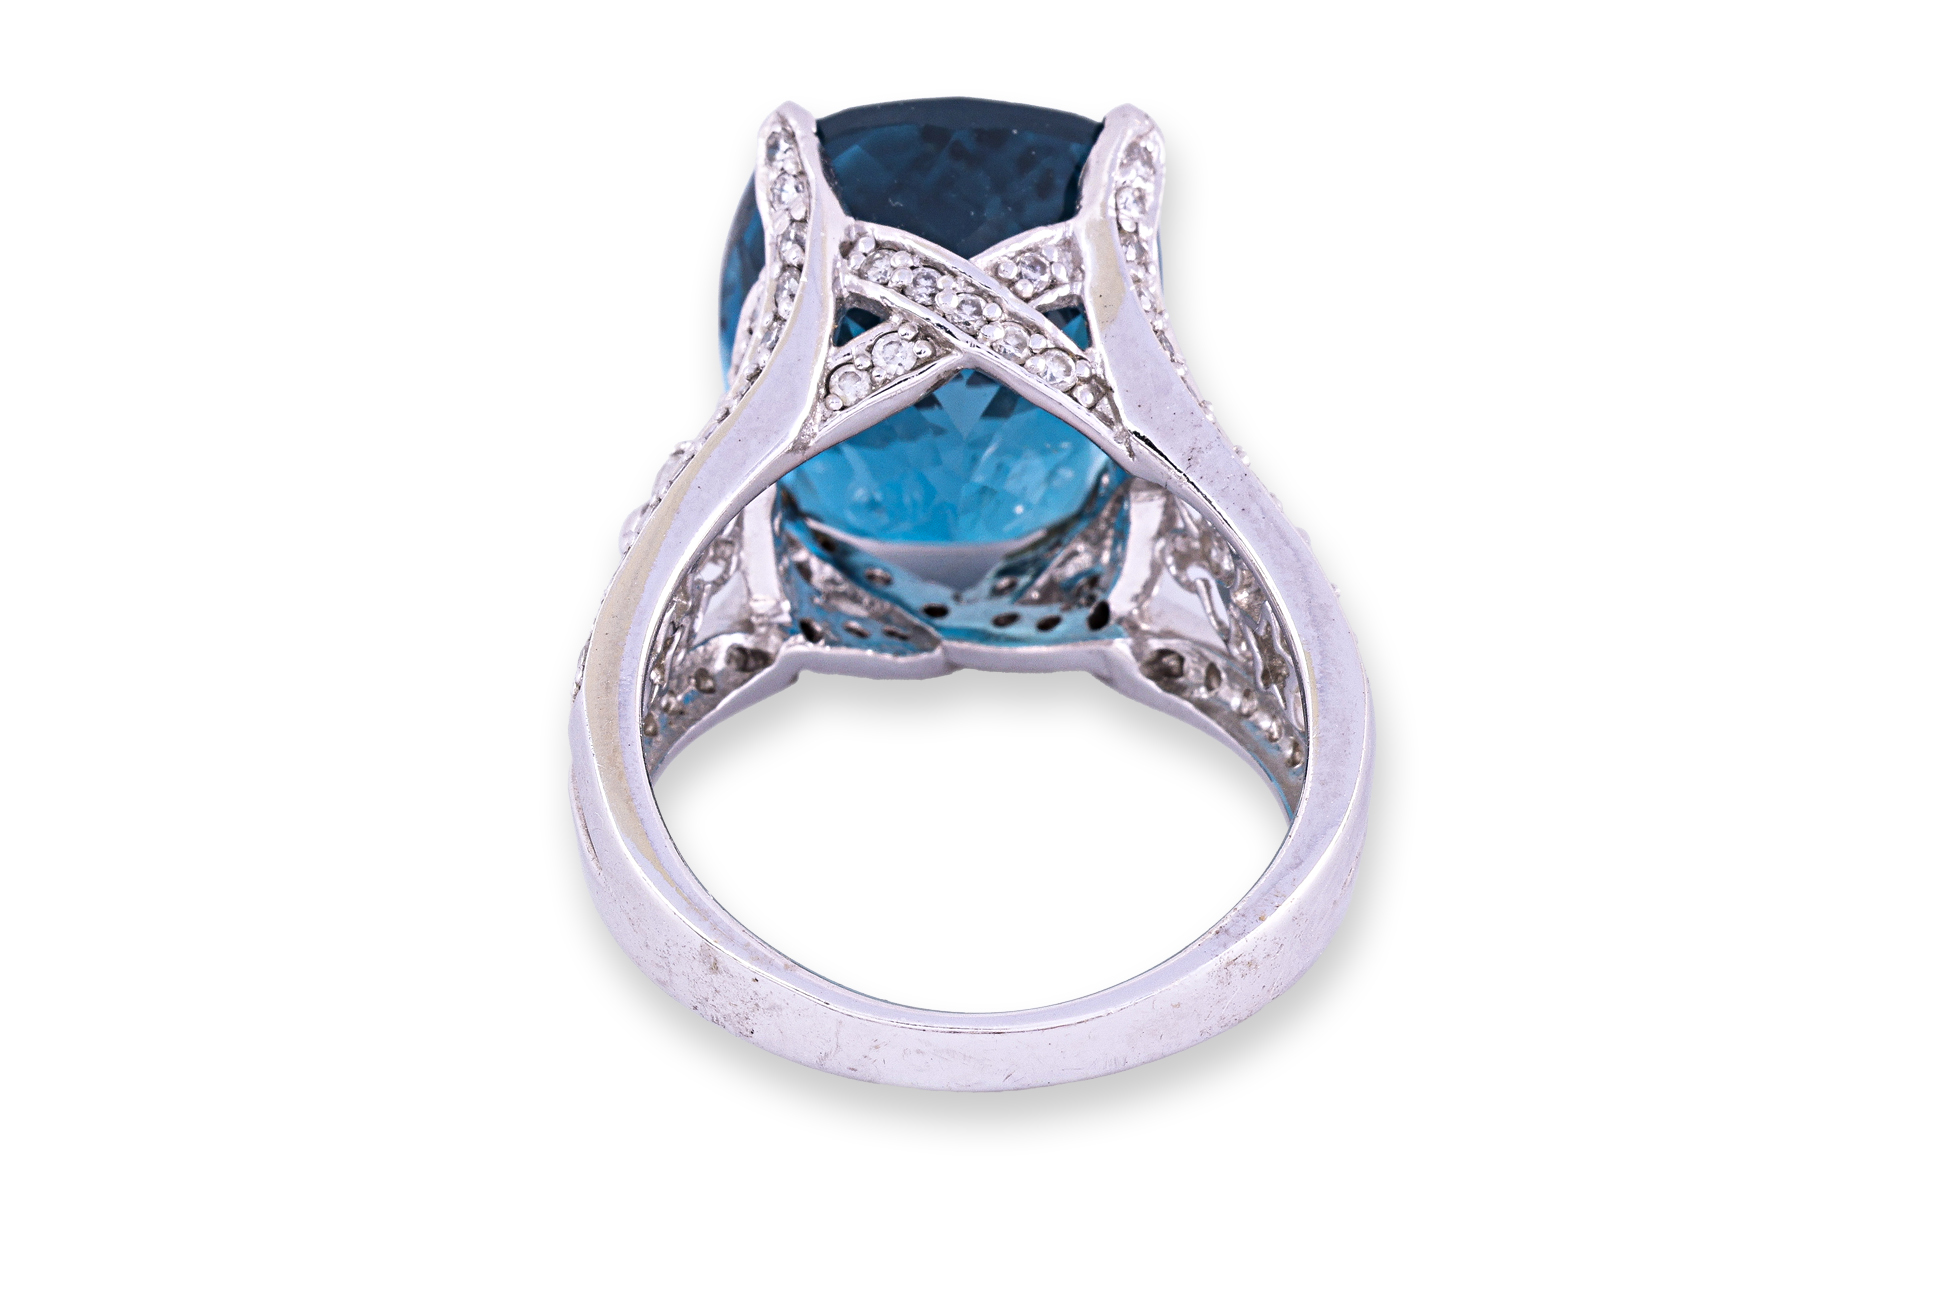 A LARGE BLUE TOPAZ AND DIAMOND RING - Image 2 of 3